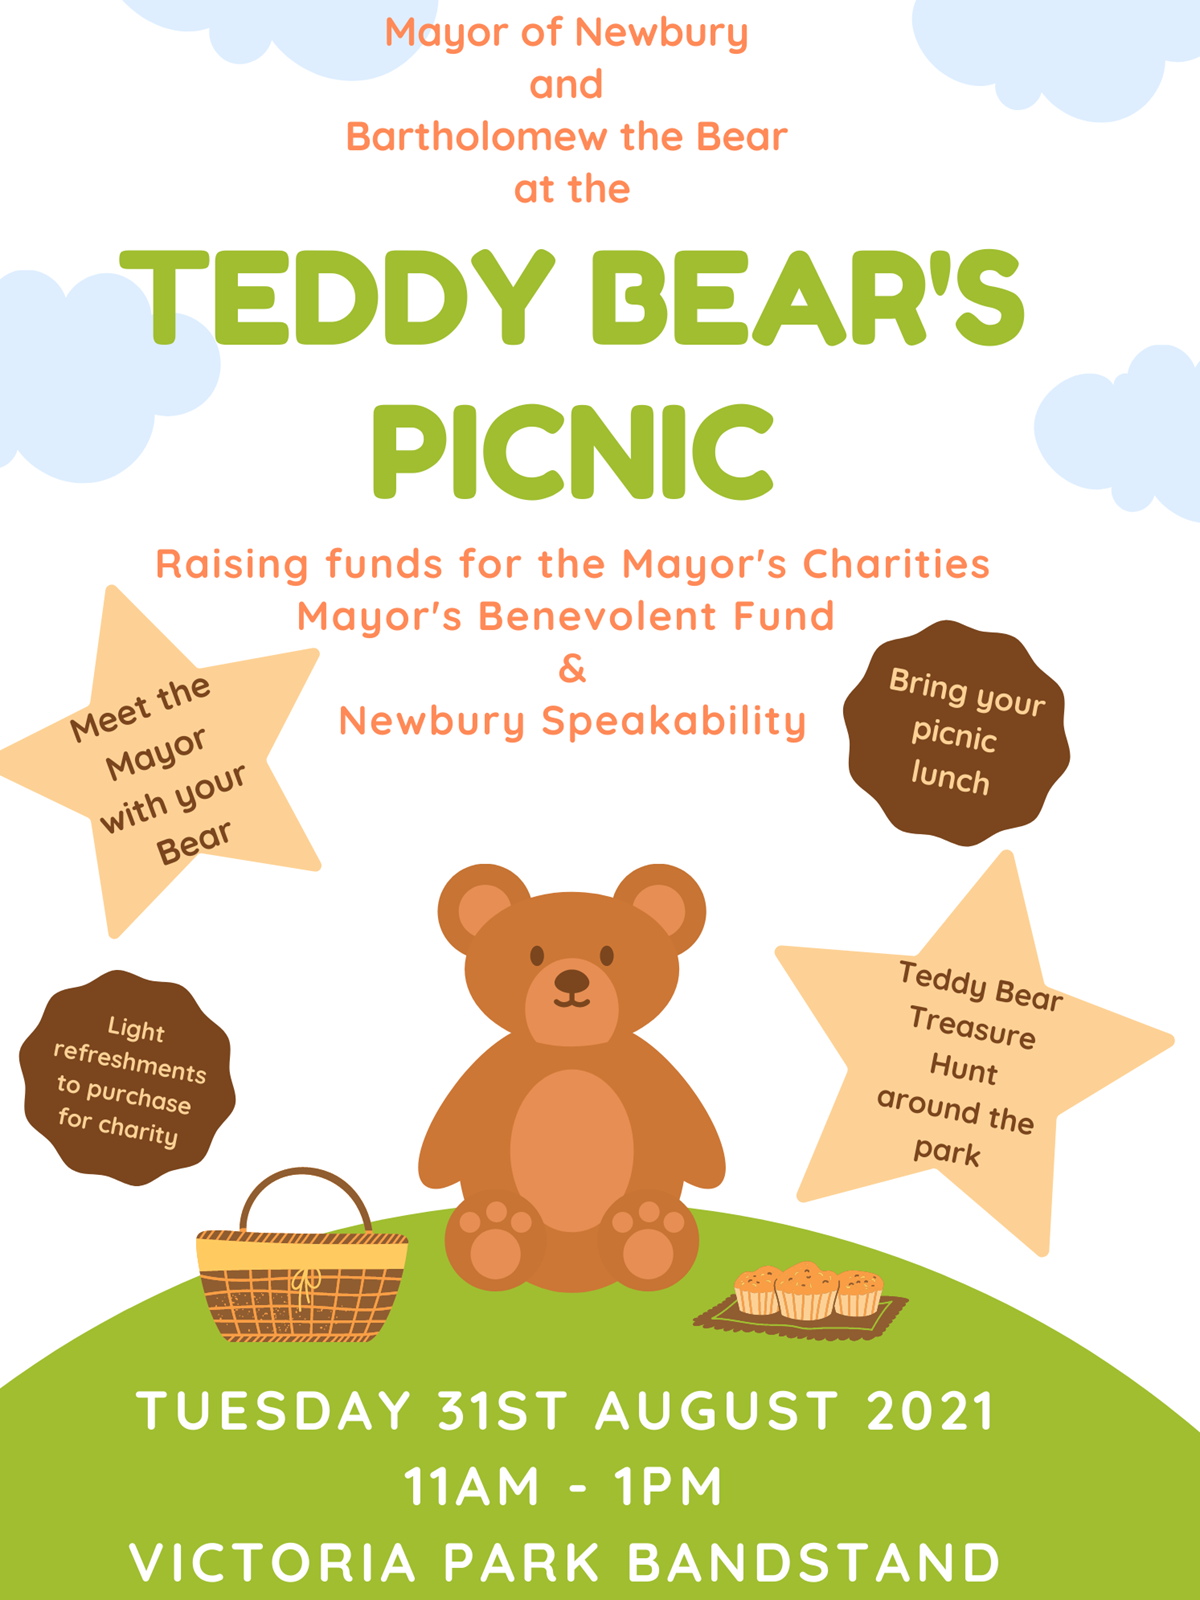 BRING YOUR TEDDY FOR A DAY OUT IN THE PARK AND MEET THE MAYOR!